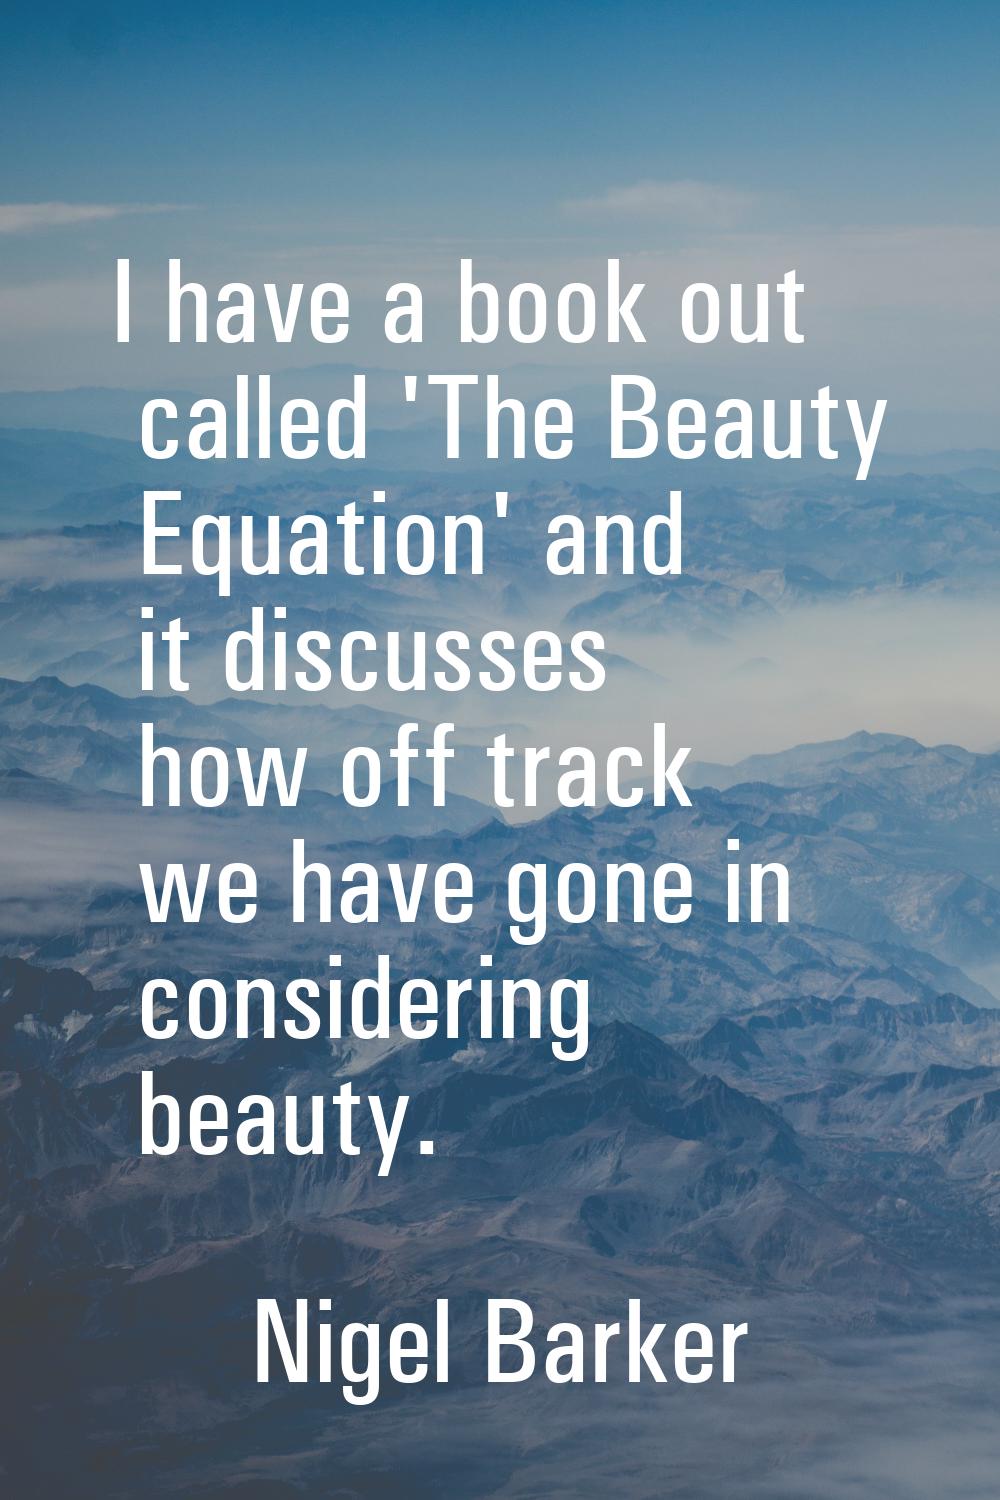 I have a book out called 'The Beauty Equation' and it discusses how off track we have gone in consi